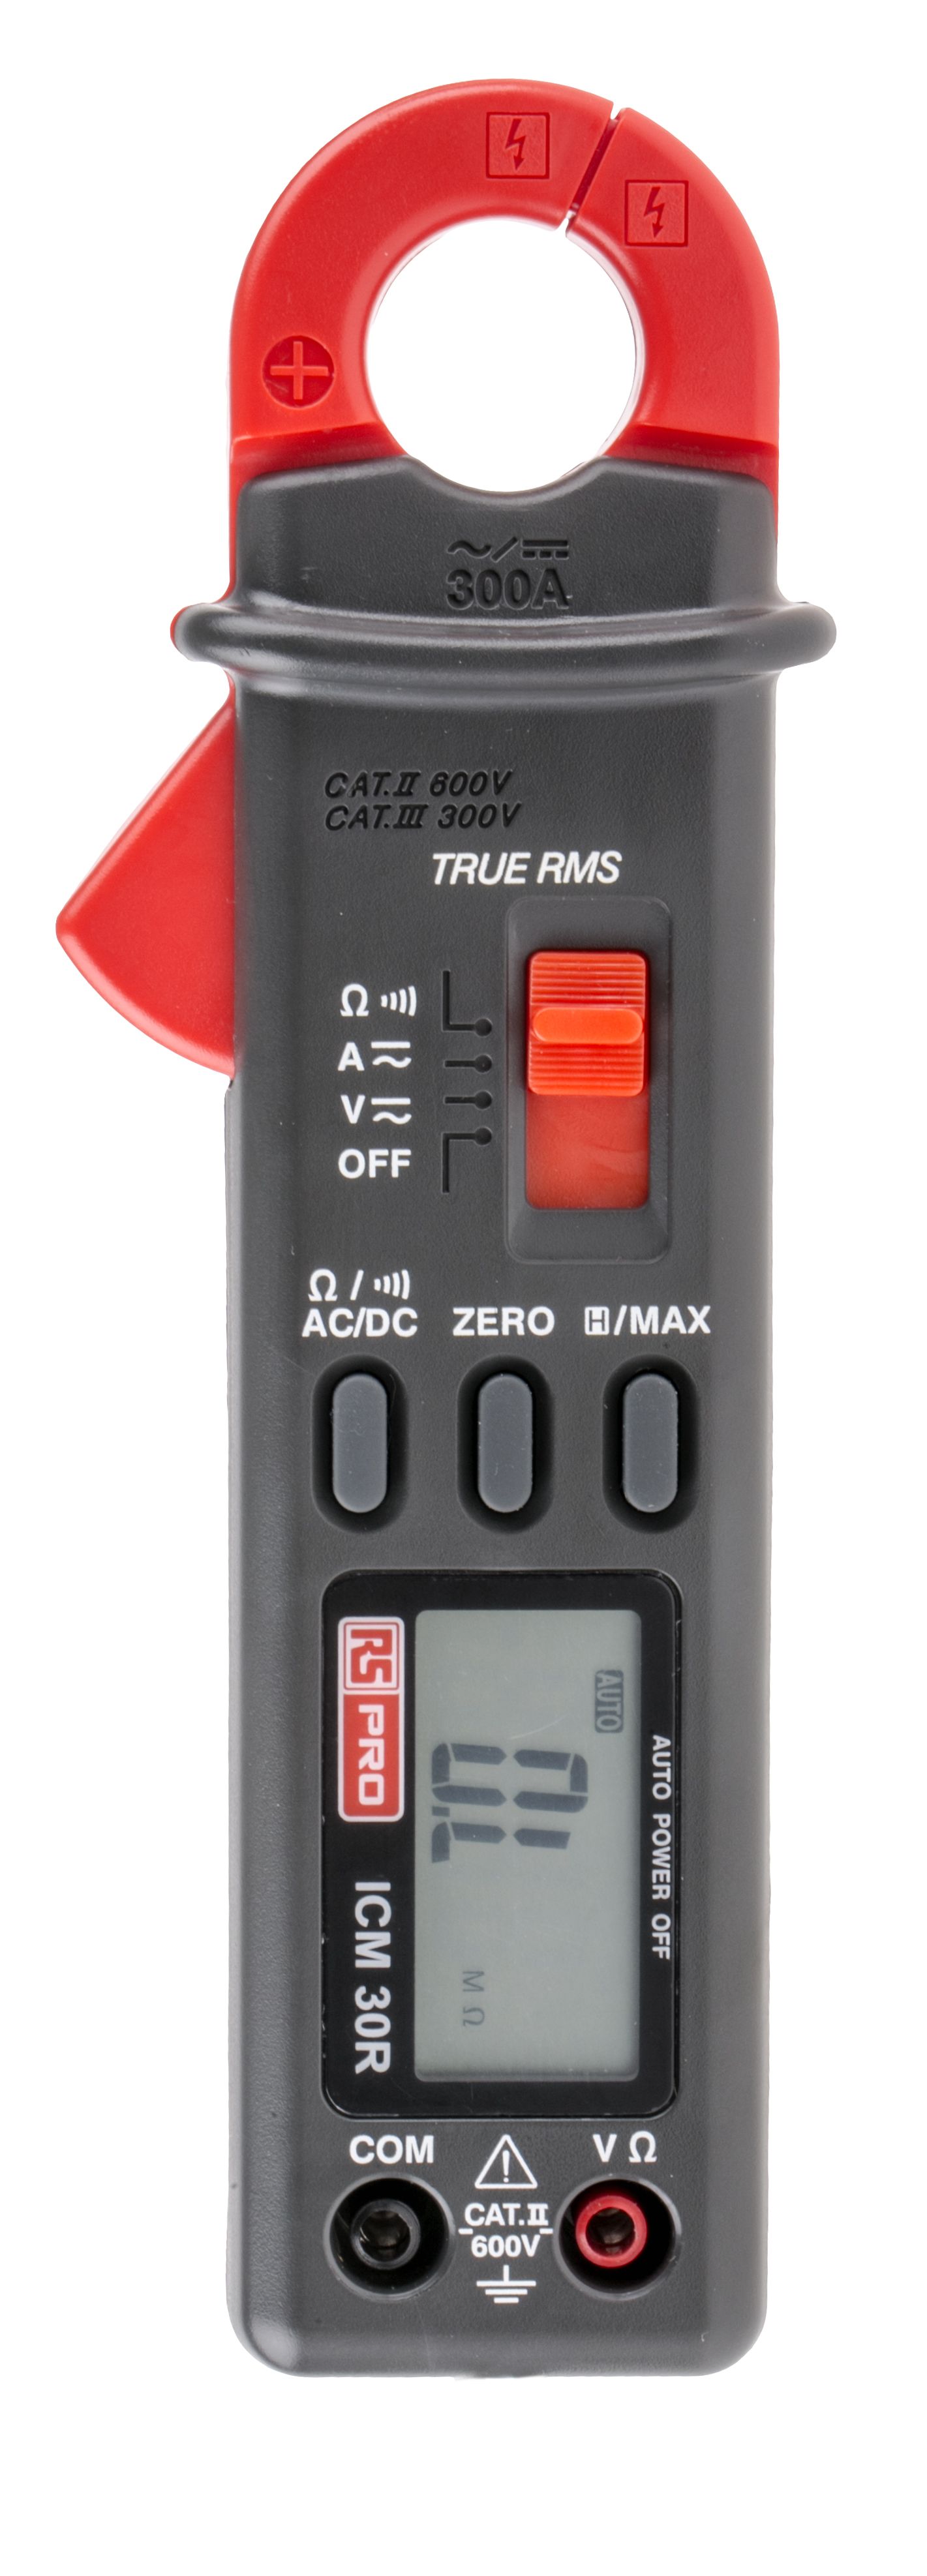 RS PRO ICM30R Clamp Meter, 300A dc, Max Current 300A ac CAT III 300V With RS Calibration